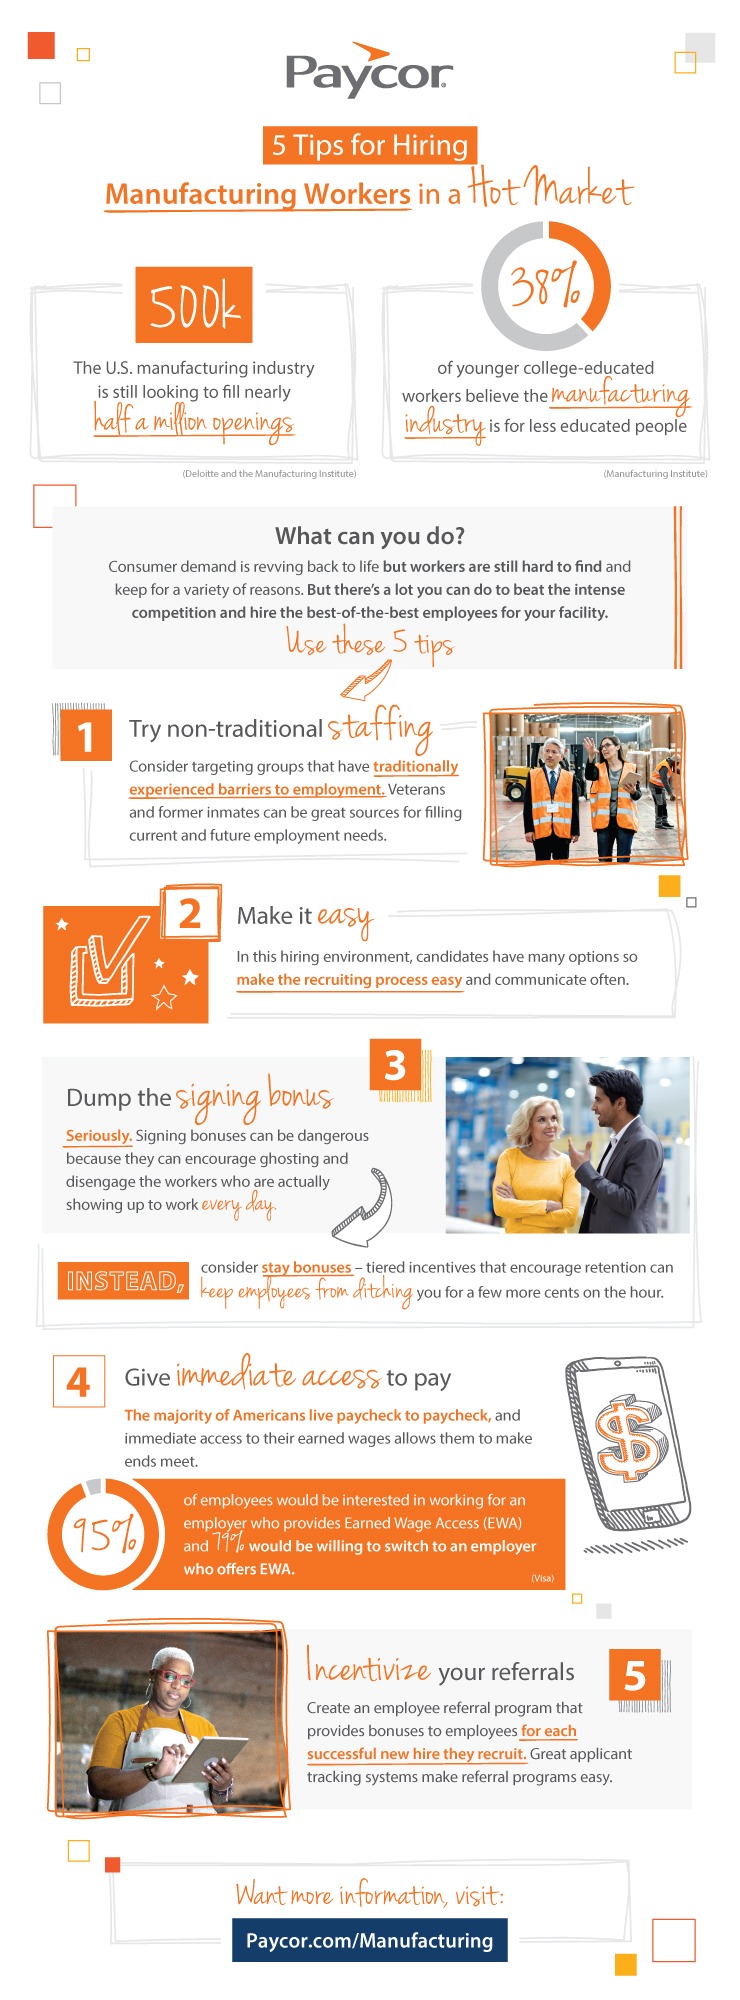 5 Tips for Hiring Manufacturing Workers in a Hot Market Infographic